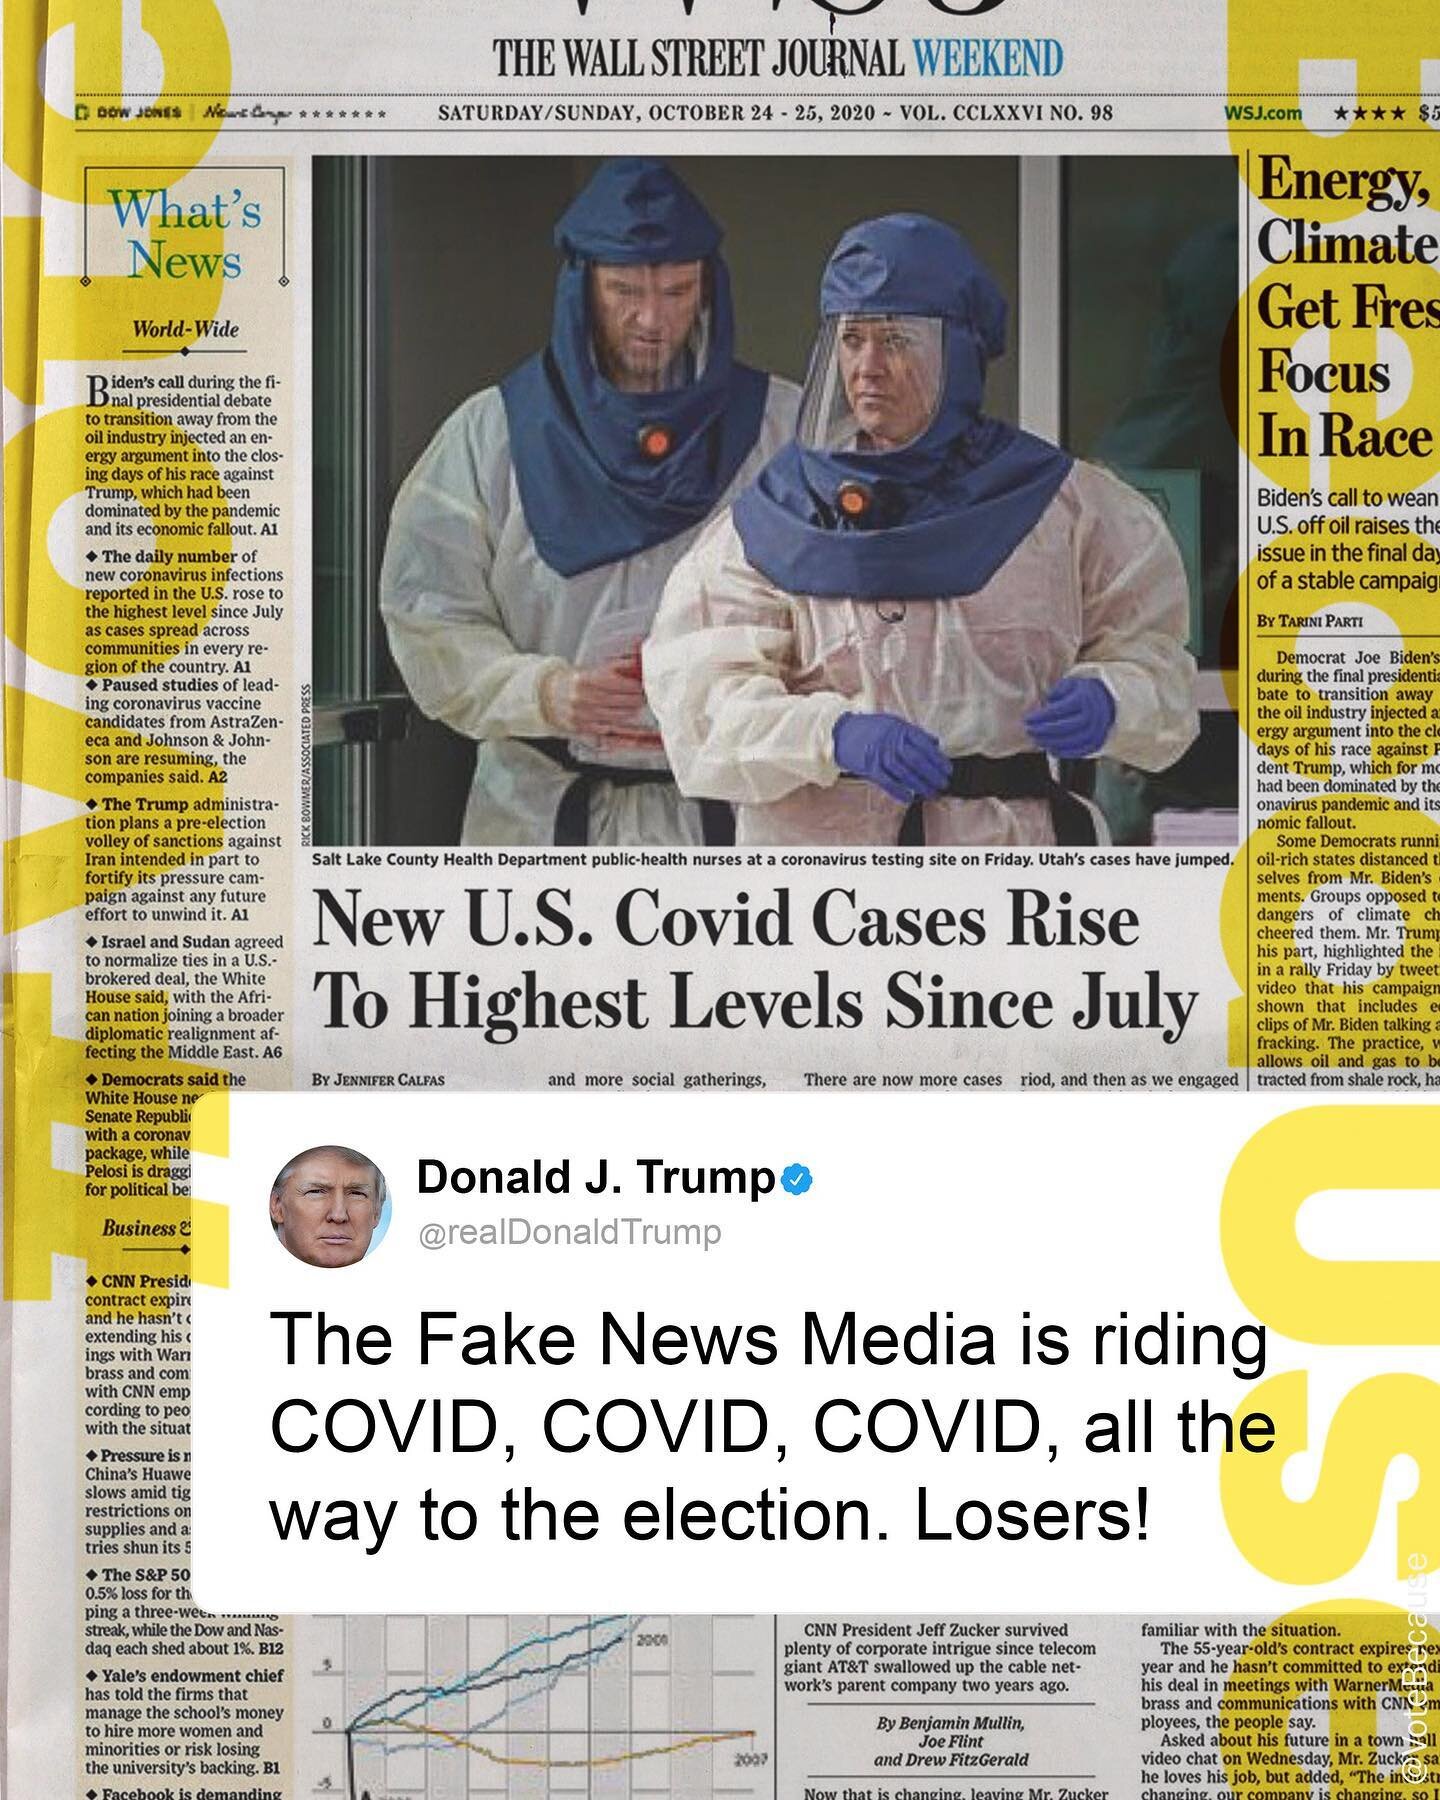 Someone tell @RealDonaldTrump that COVID is the most important news story in a century, because he thinks journalists &mdash; or as he calls them, &quot;losers&quot; &mdash; are just using it for clicks. During our country&rsquo;s third peak, as we m